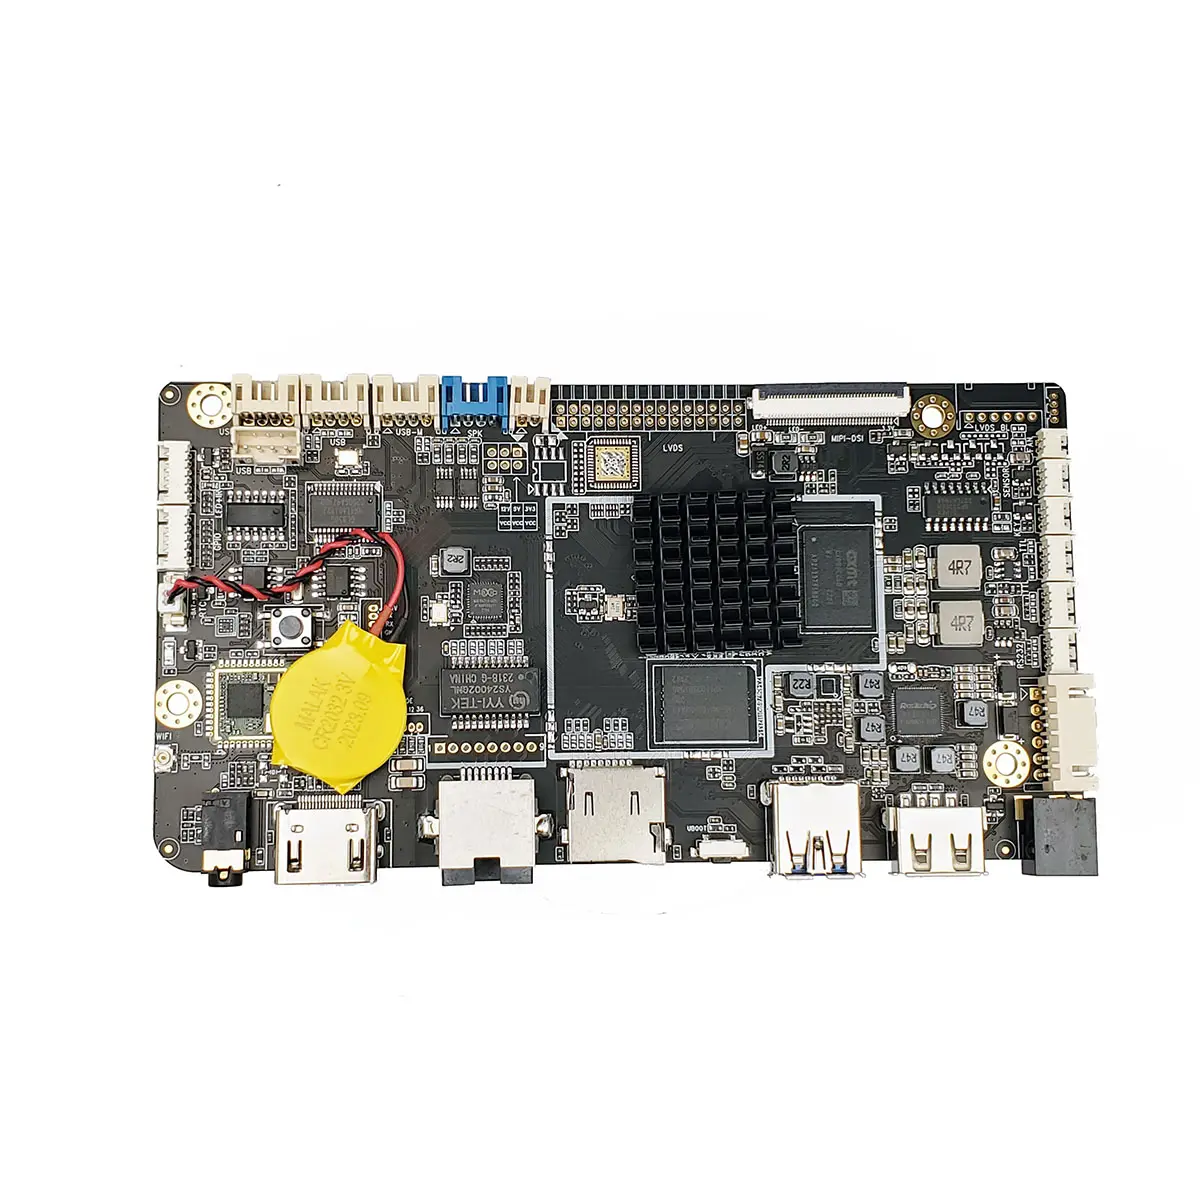 Rockchip RK3566 Solution Android motherboard board for 7 inch MIPI LCD Display w/ touchscreen QR Code scanner NFC card reader